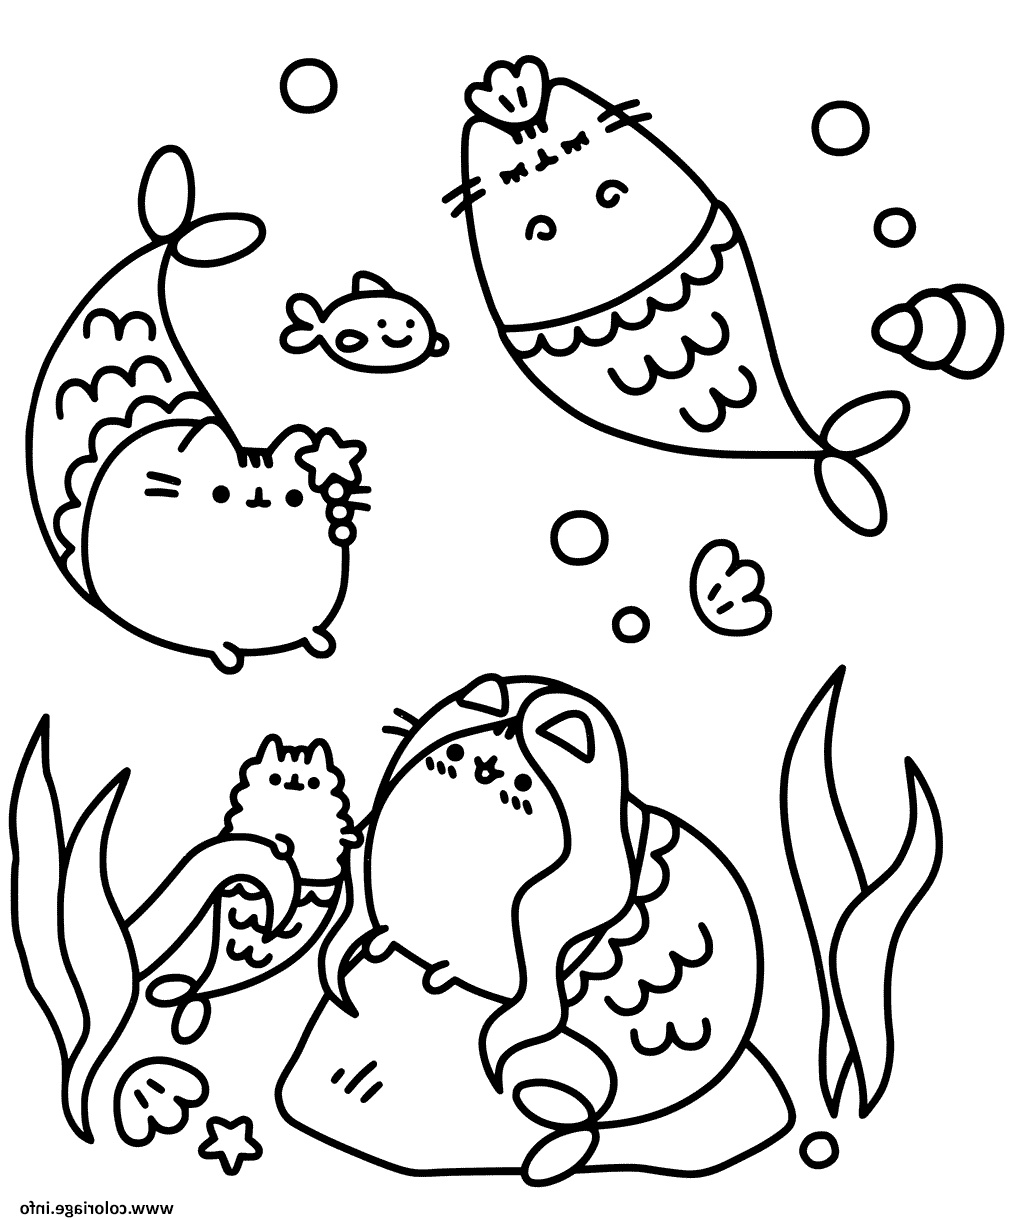 Coloriage Pusheen Beau Images Coloriage Pusheen the Cat Underwater Jecolorie